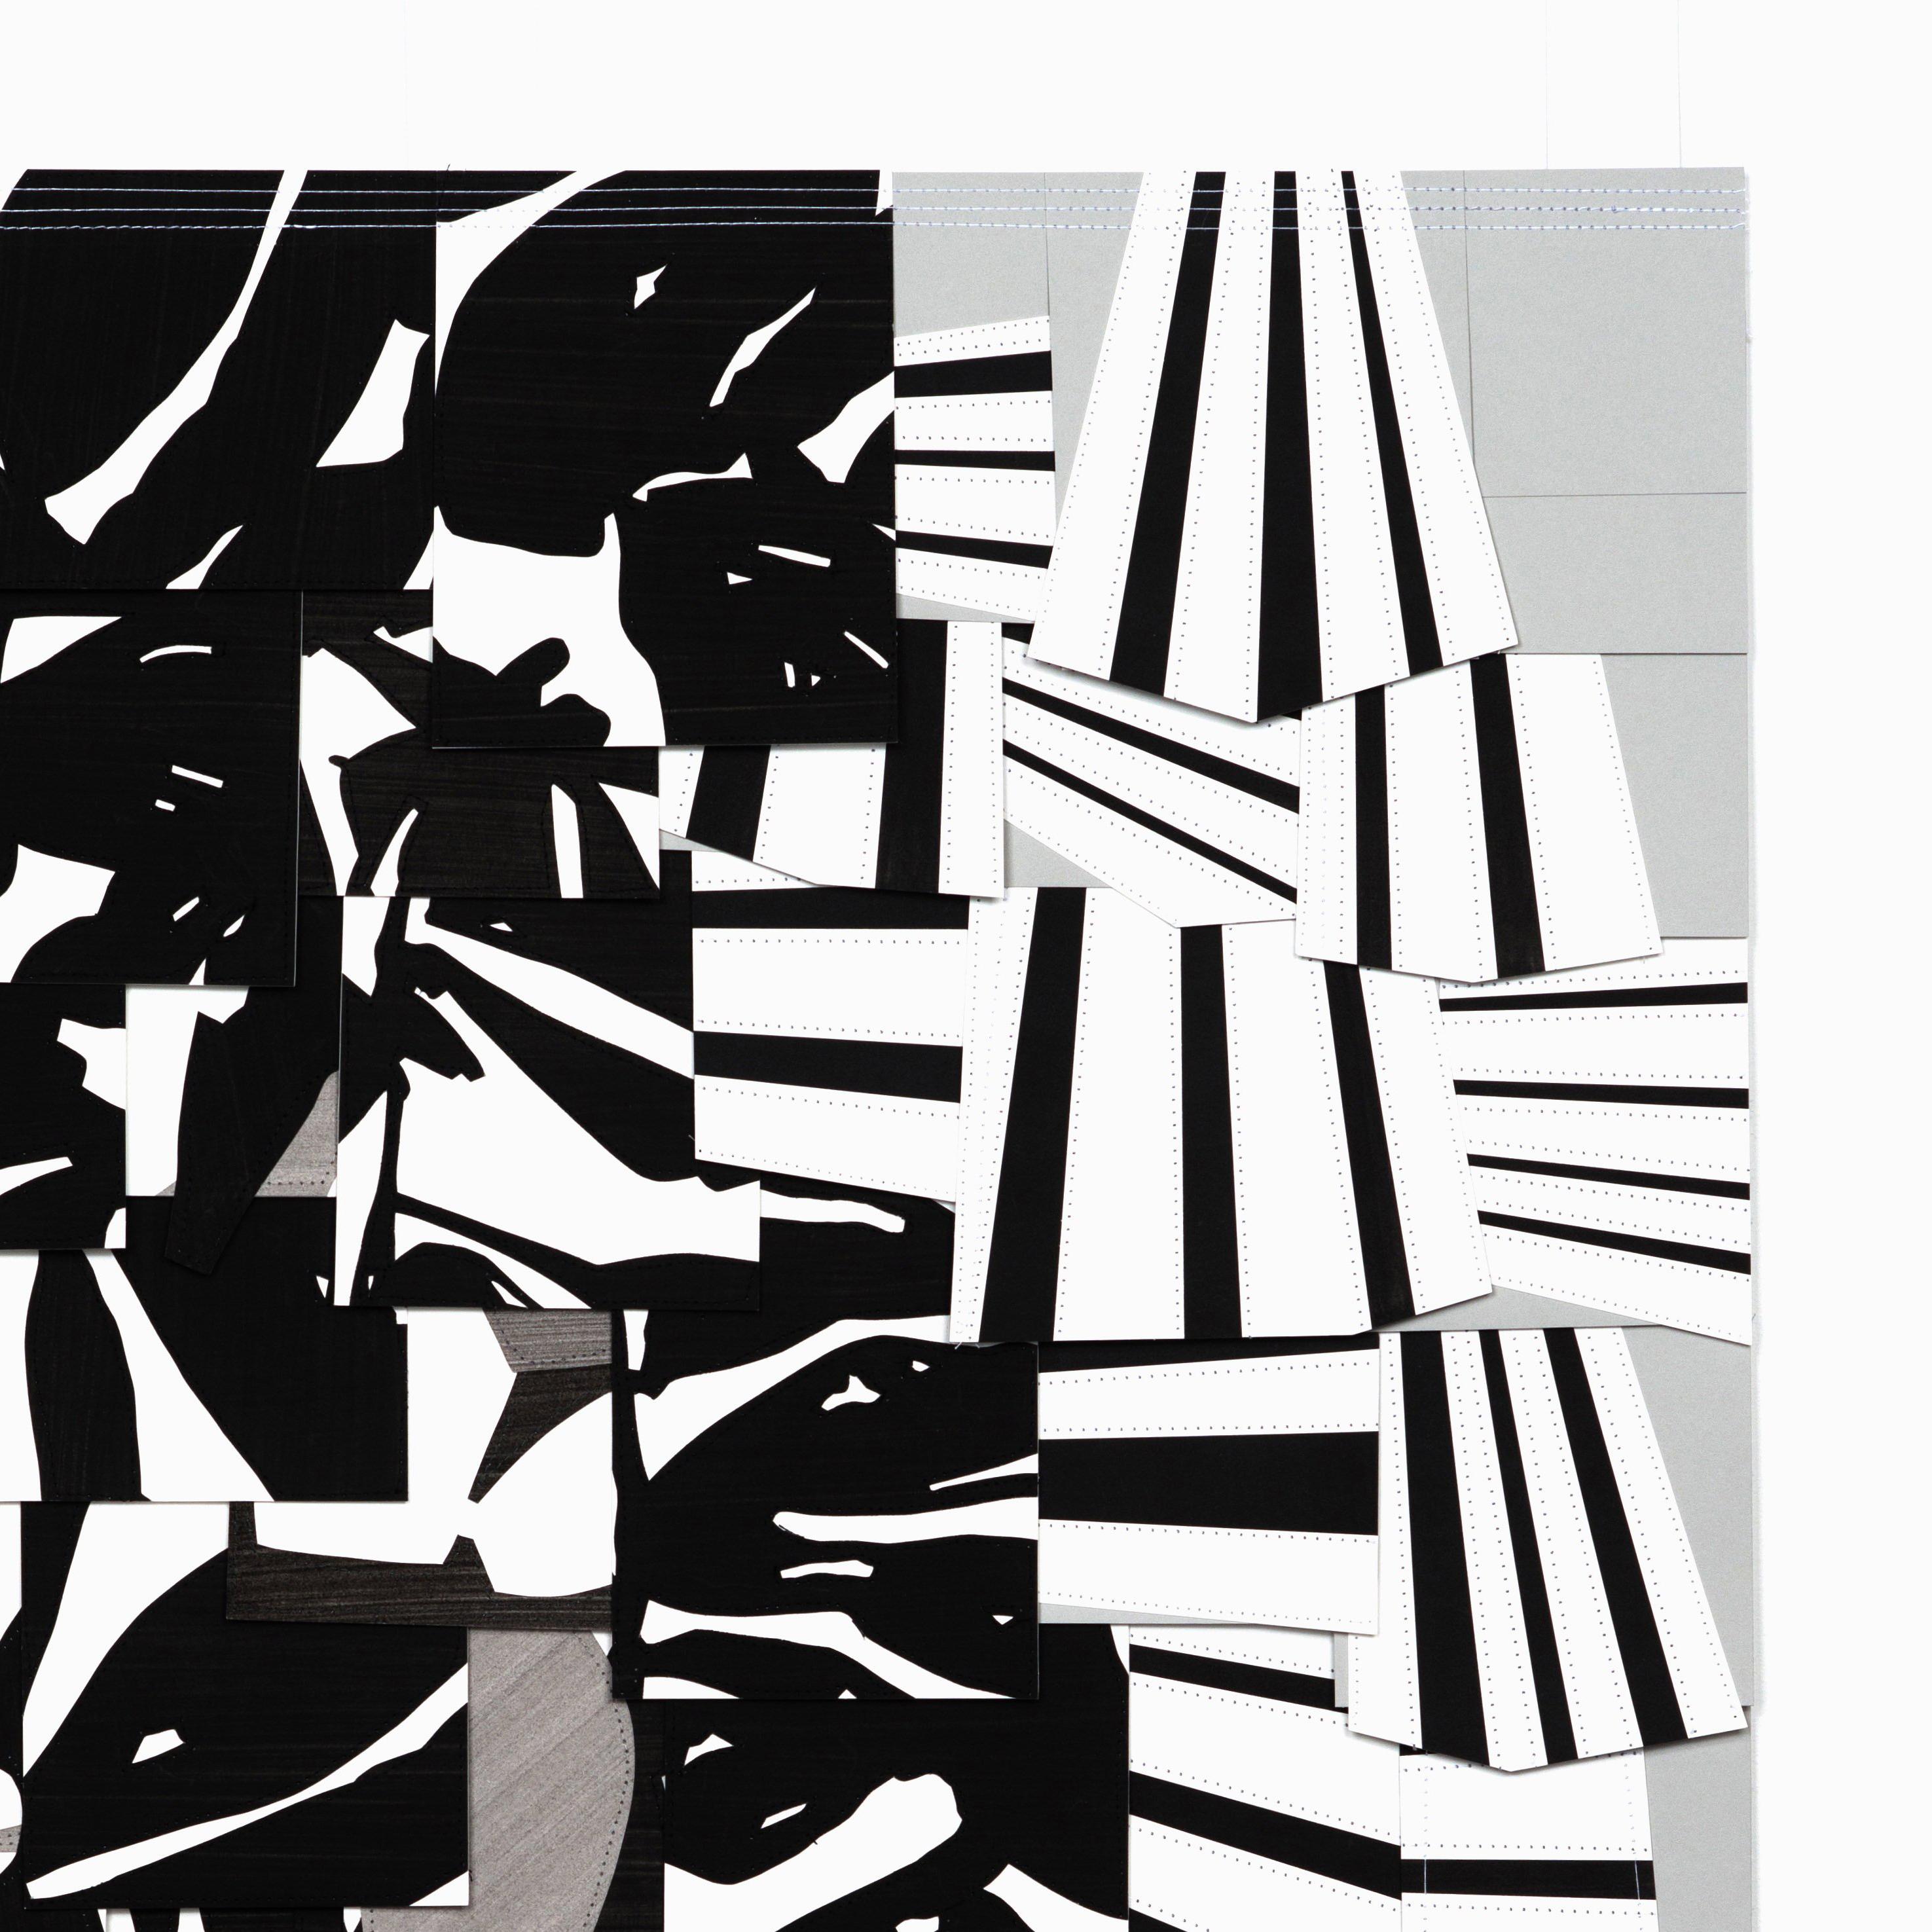 Untitled (A) is primarily black, white, and gray.

Raymond Saá’s collages are made of hand-painted paper, cut into various shapes that are then sewn together. The end result is an overlapping shingle-like pattern of color, shape, and form. The work